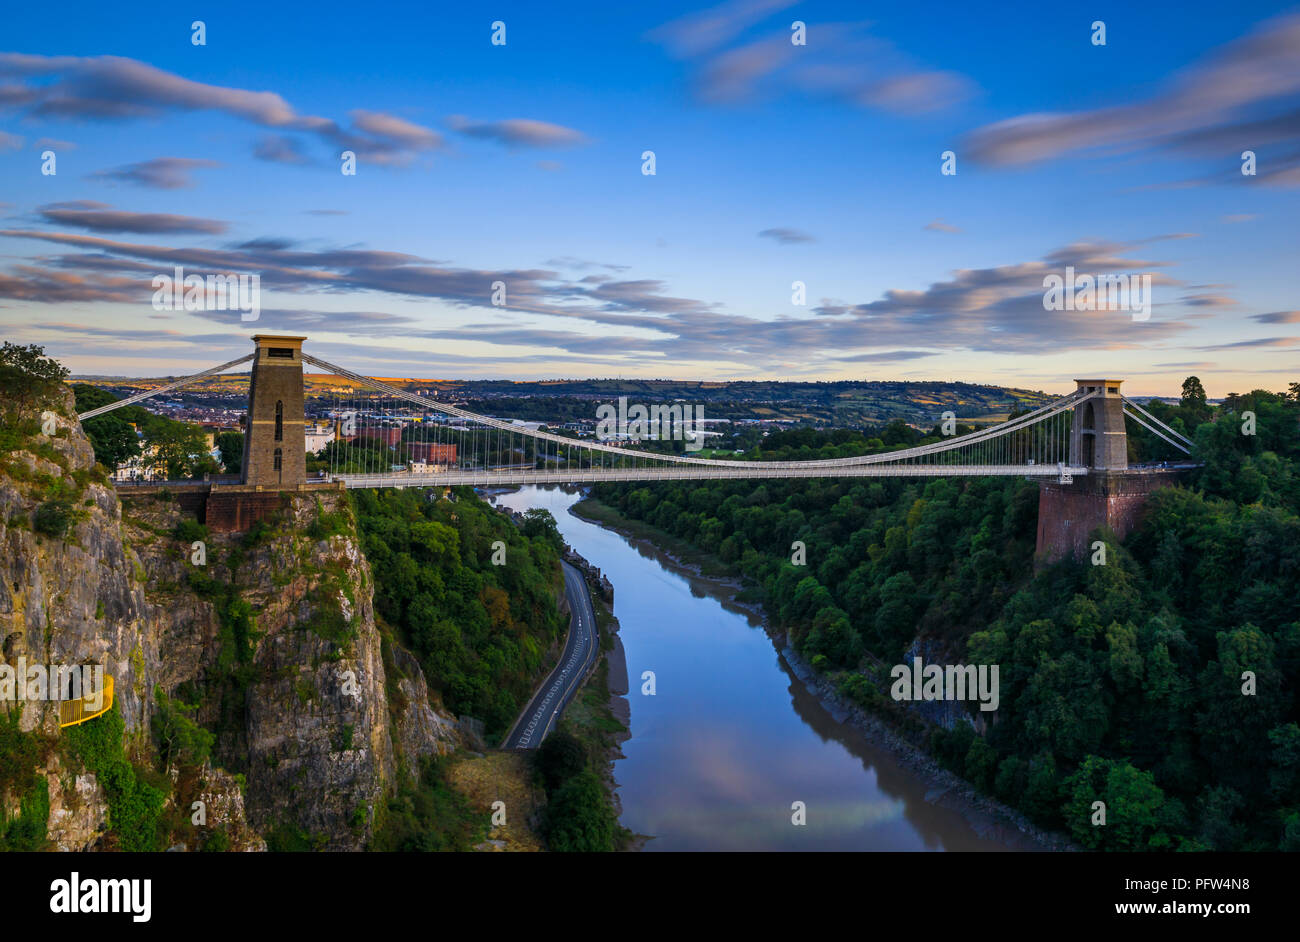 View of clouds moving over the Clifton Suspension Bridge at dusk Stock Photo